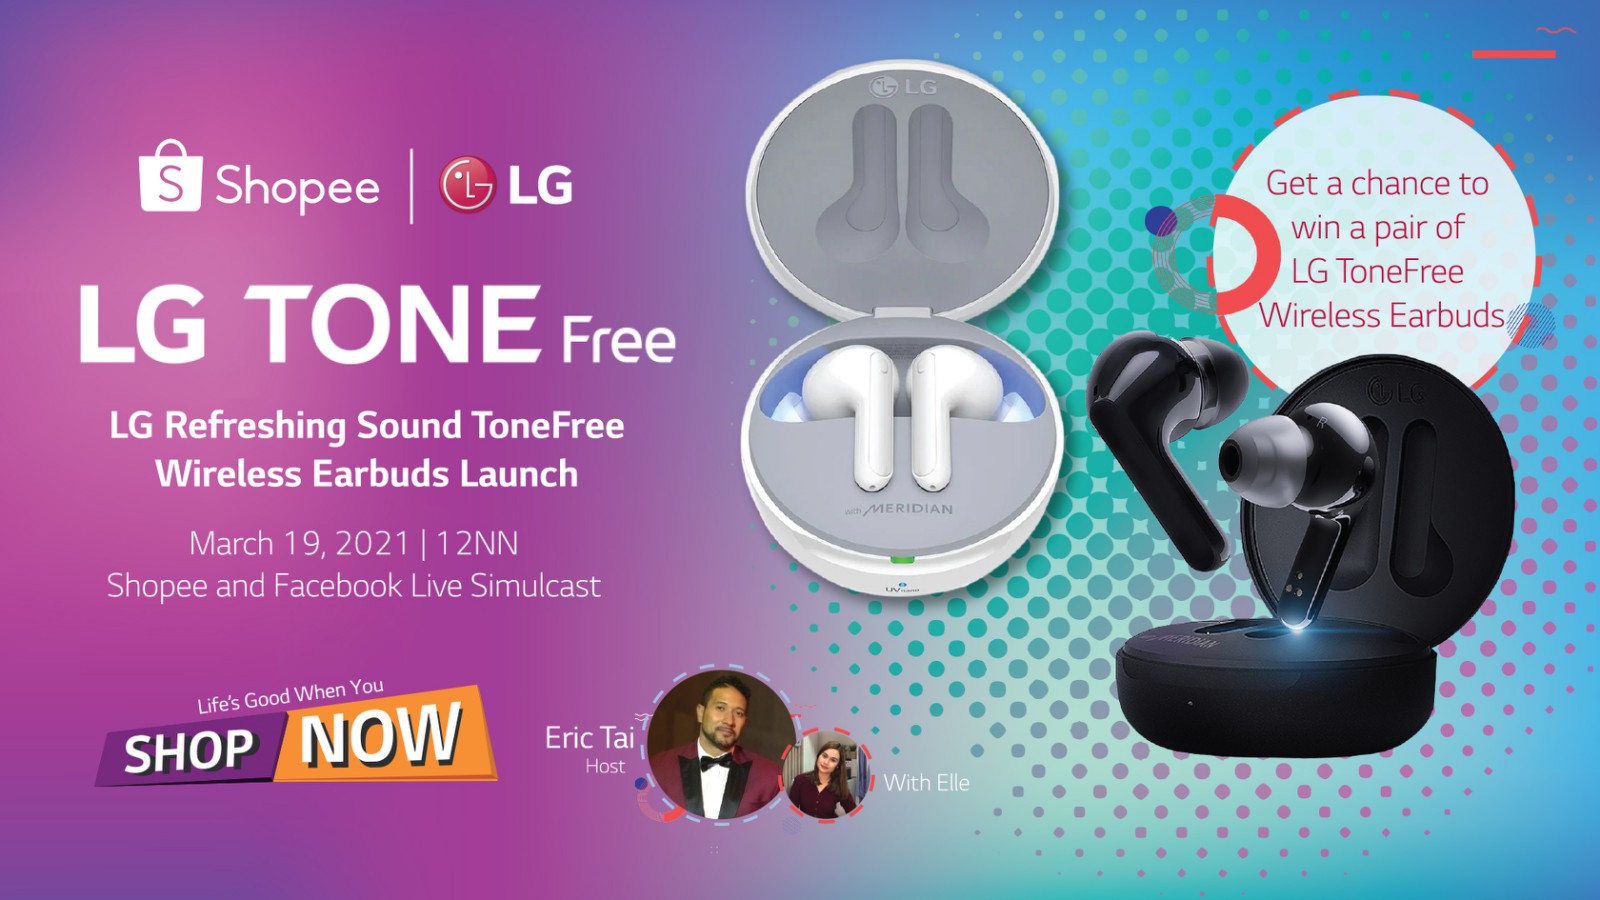 LG ToneFree livestream in LG Shopee flagship store